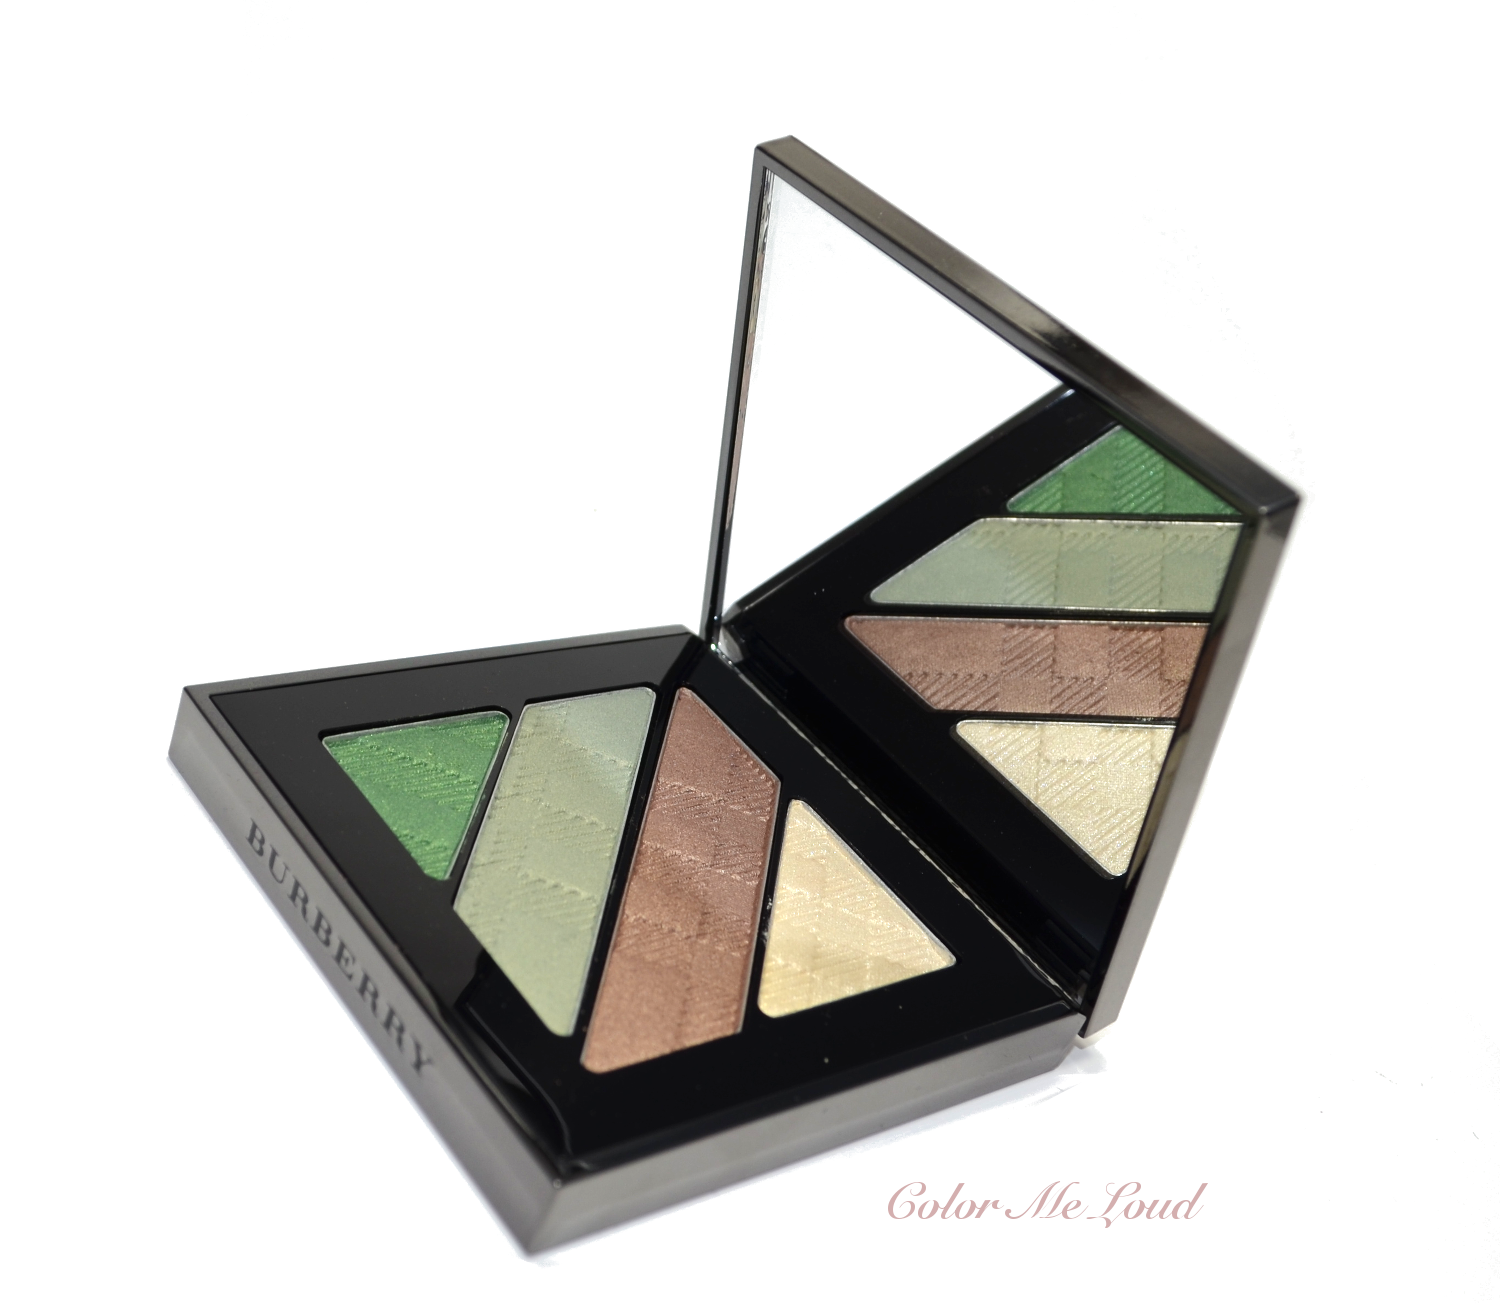 Caught In Action: Burberry Complete Eye Palette #15 Sage Green from Spring 2014 Collection